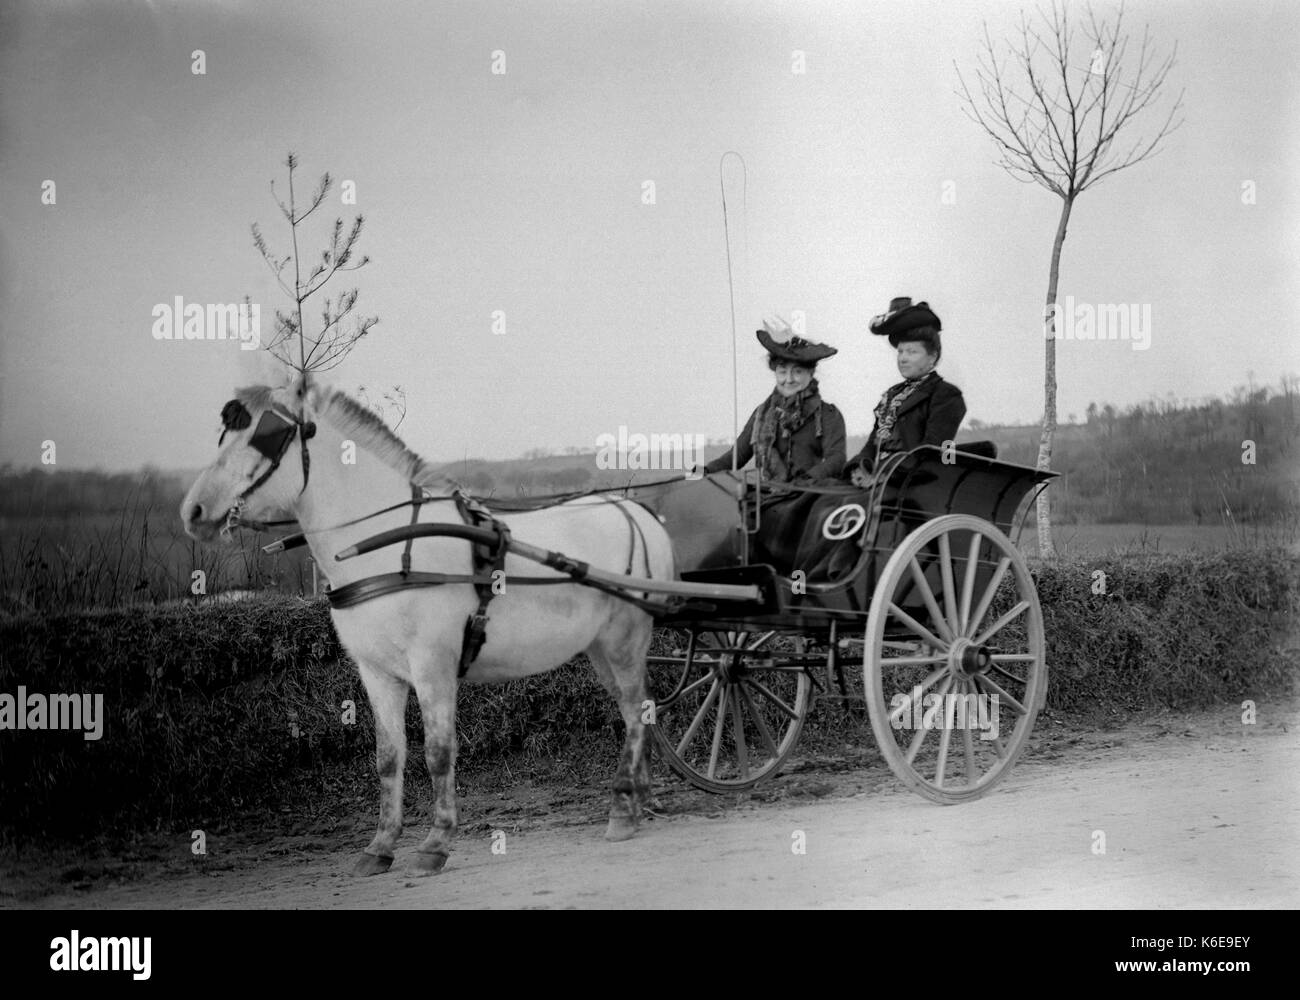 AJAXNETPHOTO. 1891-1910 (APPROX). SAINT-LO REGION, NORMANDY.FRANCE. - TWO LADIES IN A TRAP POSE FOR THE CAMERA ON A COUNTRY ROAD. PHOTOGRAPHER:UNKNOWN © DIGITAL IMAGE COPYRIGHT AJAX VINTAGE PICTURE LIBRARY SOURCE: AJAX VINTAGE PICTURE LIBRARY COLLECTION REF:AVL FRA 1890 05 Stock Photo